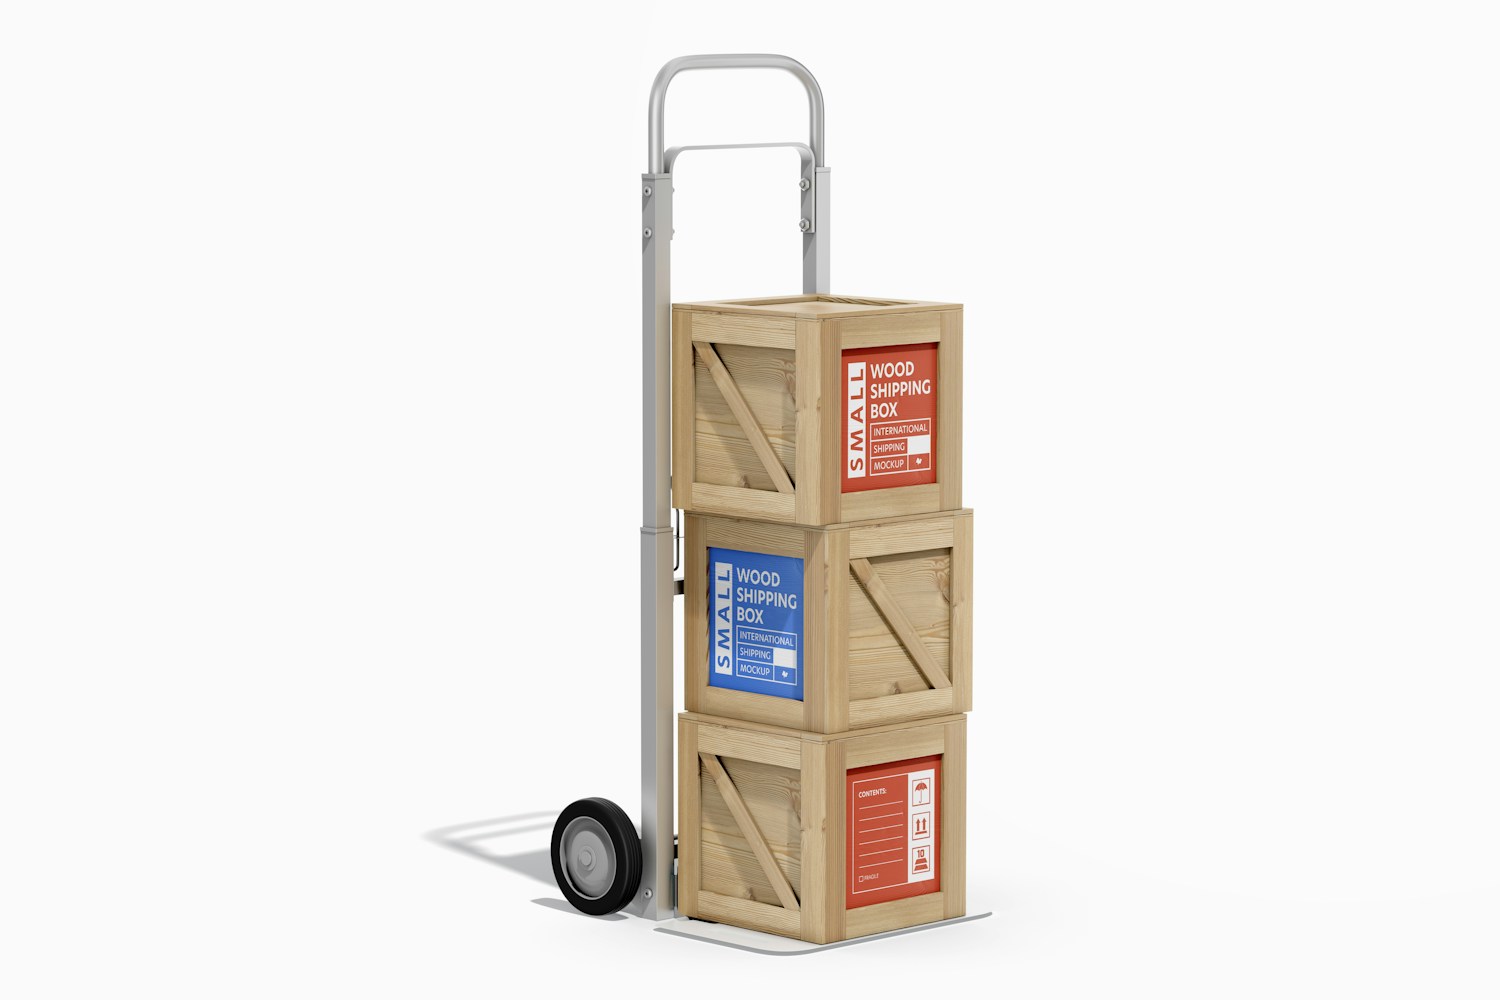 Small Wood Shipping Boxes Mockup, on Hand Truck